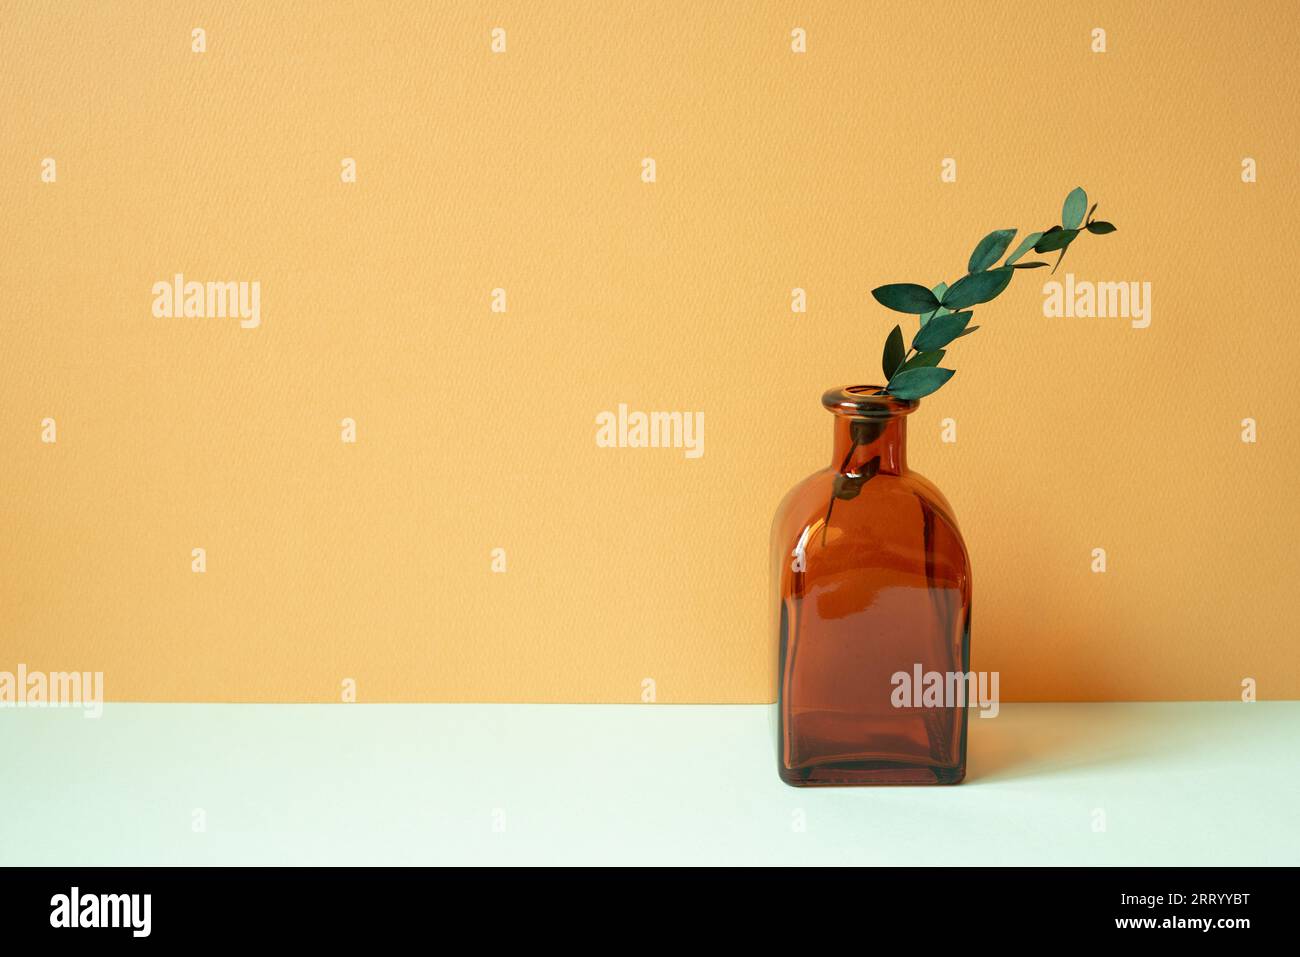 Brown glass vase of eucalyptus leaf on mint green table. orange wall background Stock Photo